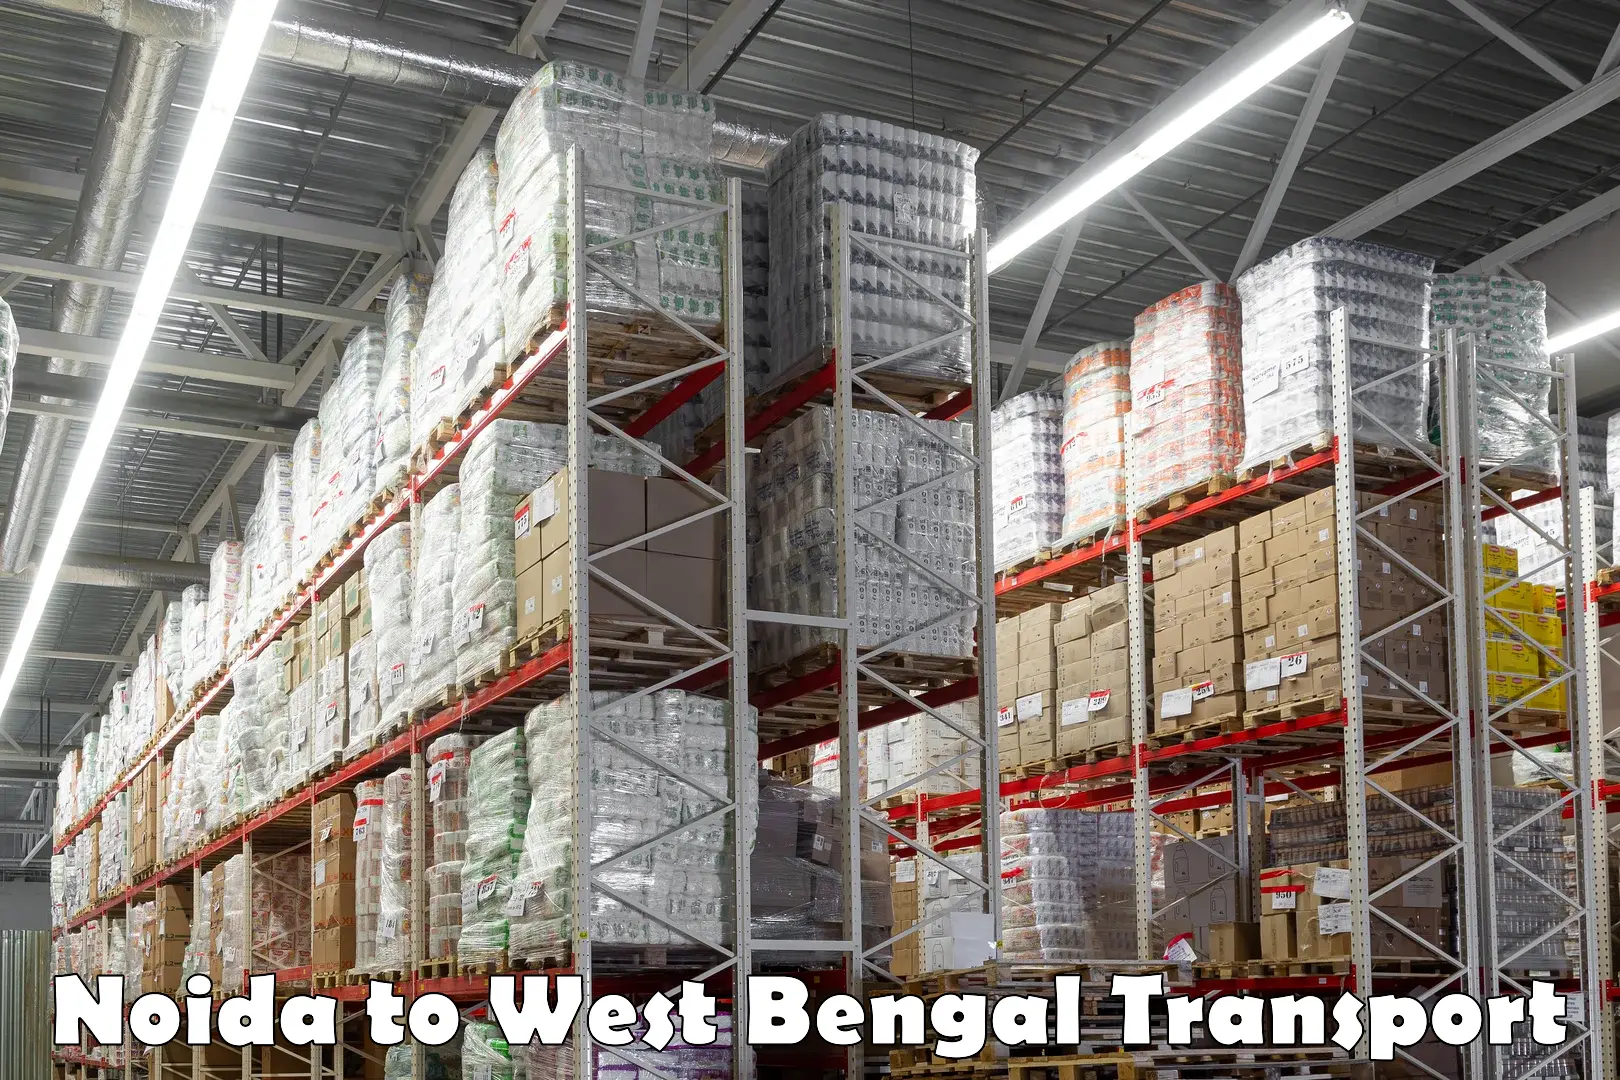 Commercial transport service Noida to West Bengal